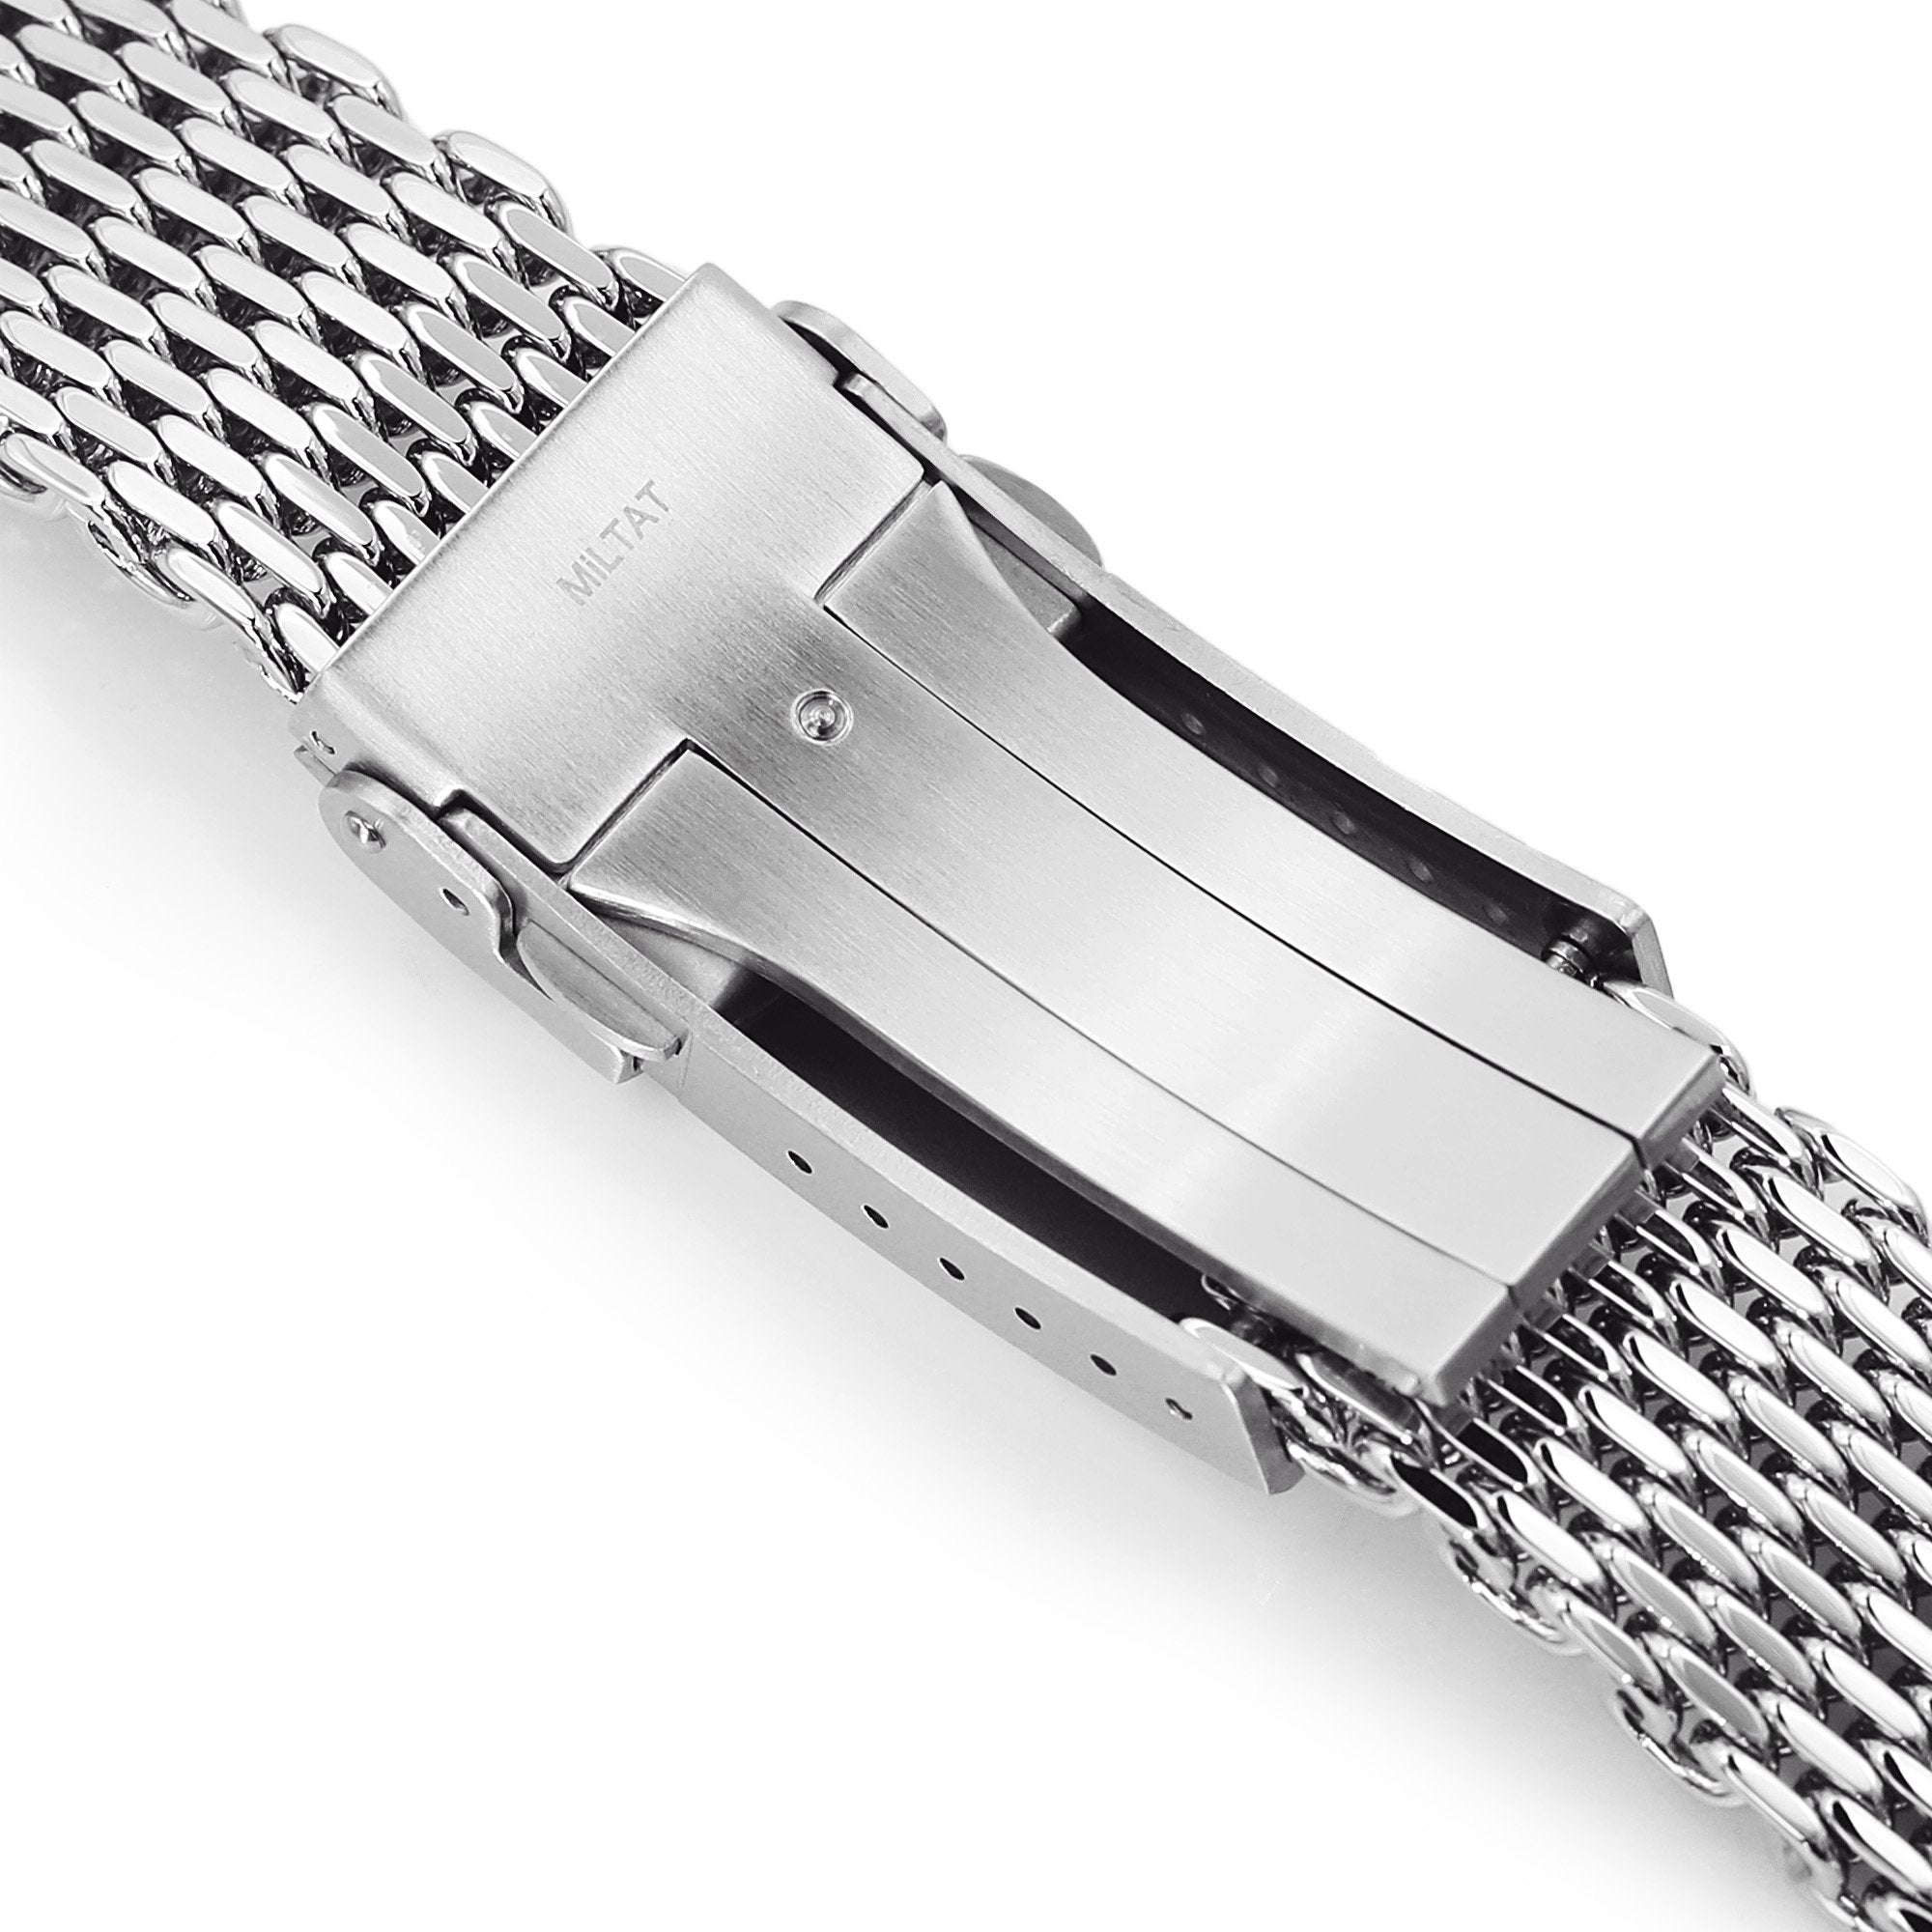 22mm Tapered "SHARK" Mesh Band Stainless Steel Watch Bracelet V-Clasp Polished Strapcode Watch Bands